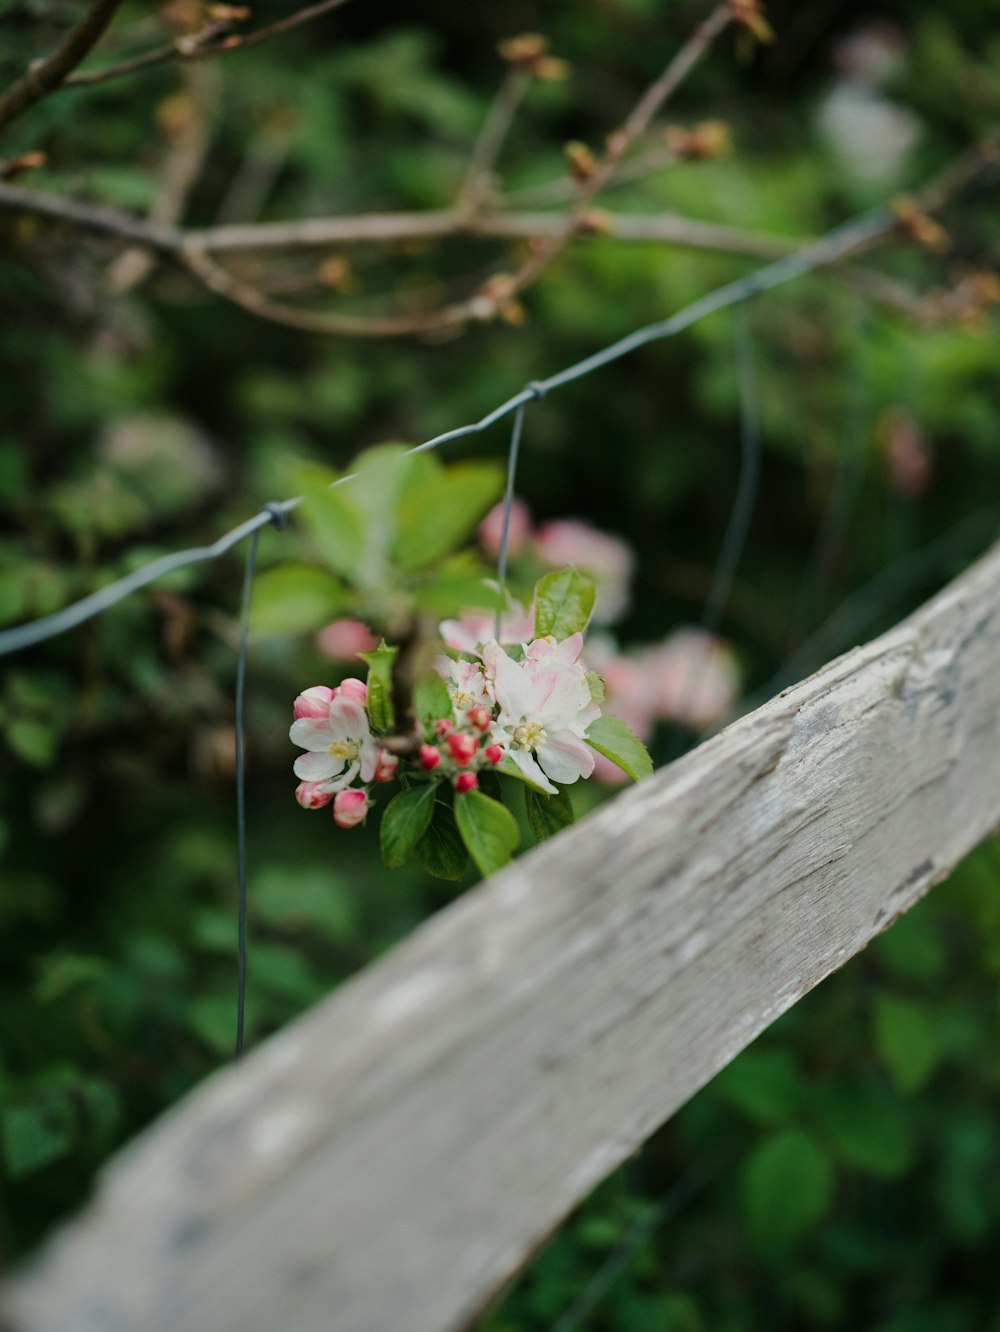 a branch of an apple tree with pink and white flowers